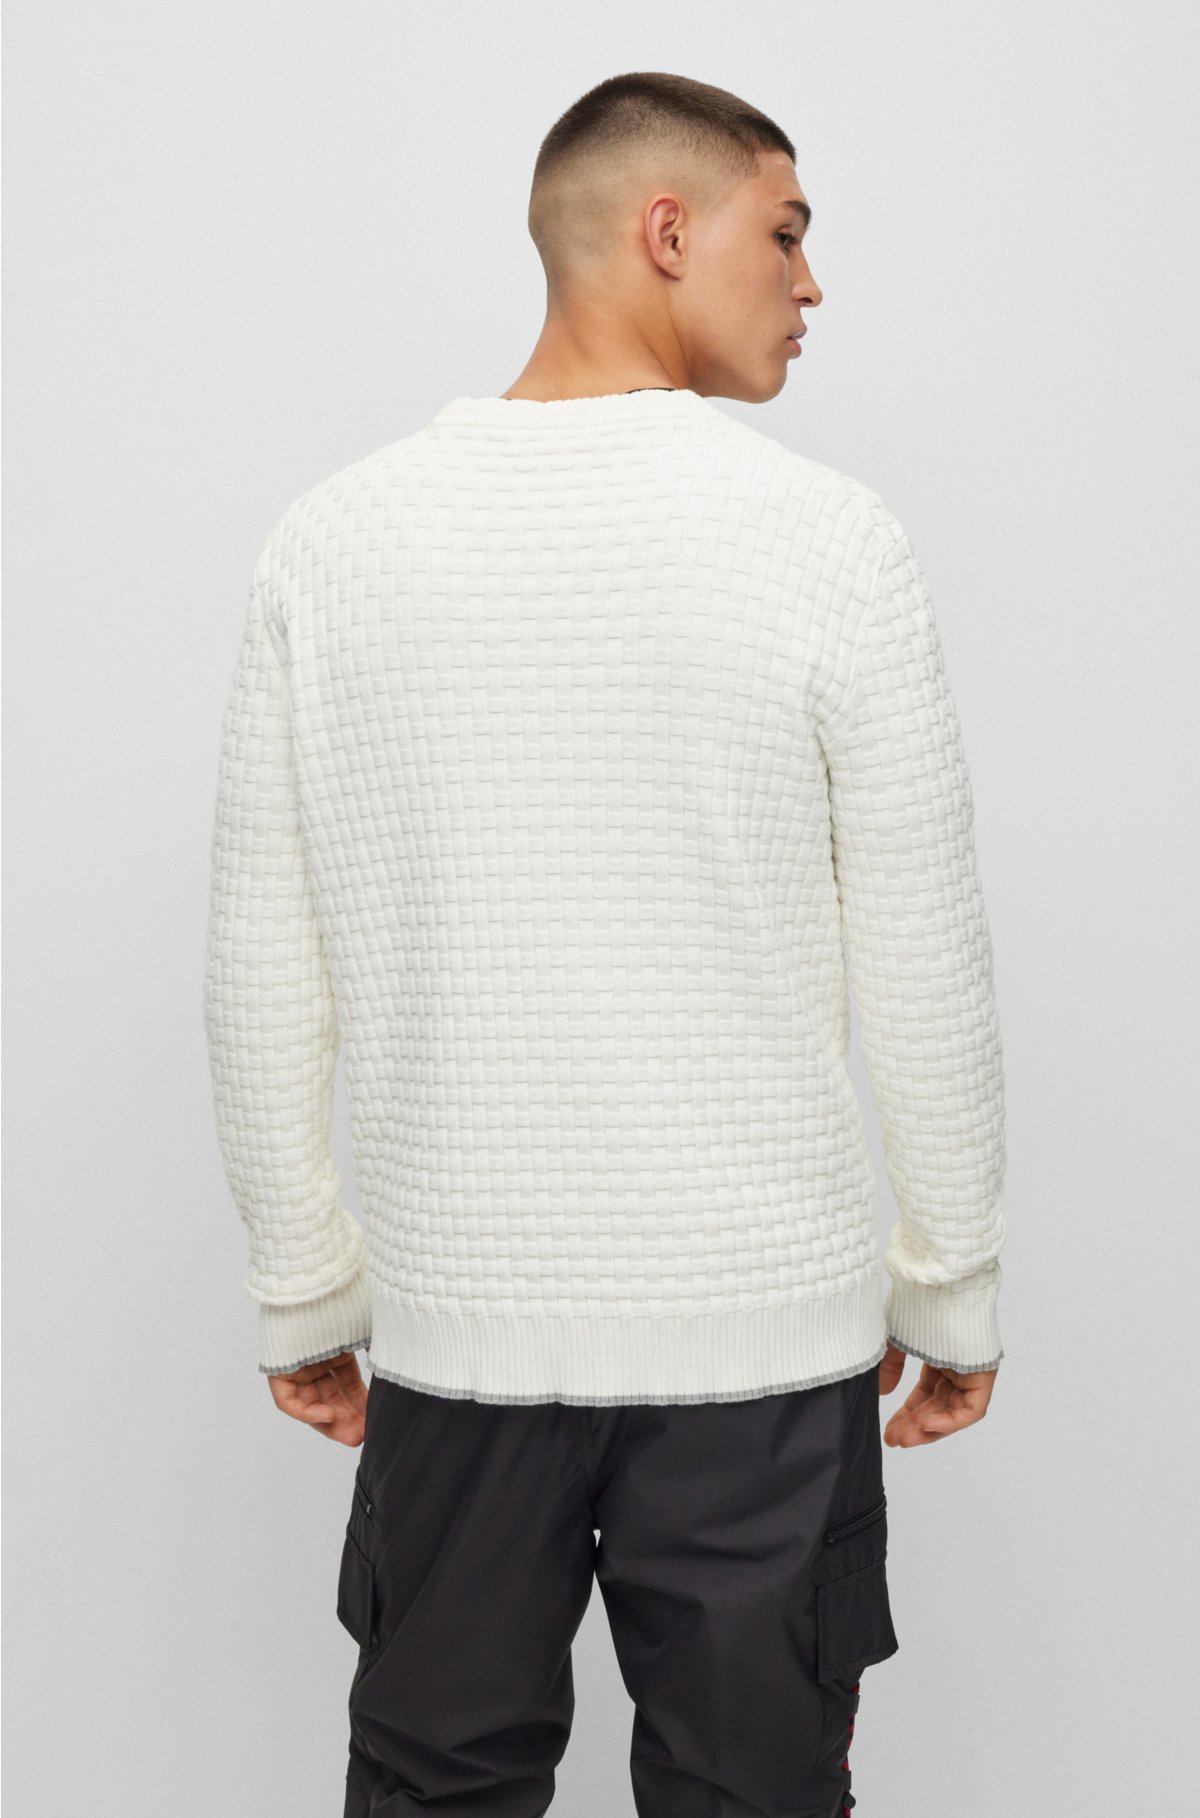 HUGO - Crew-neck sweater in cotton with woven structure